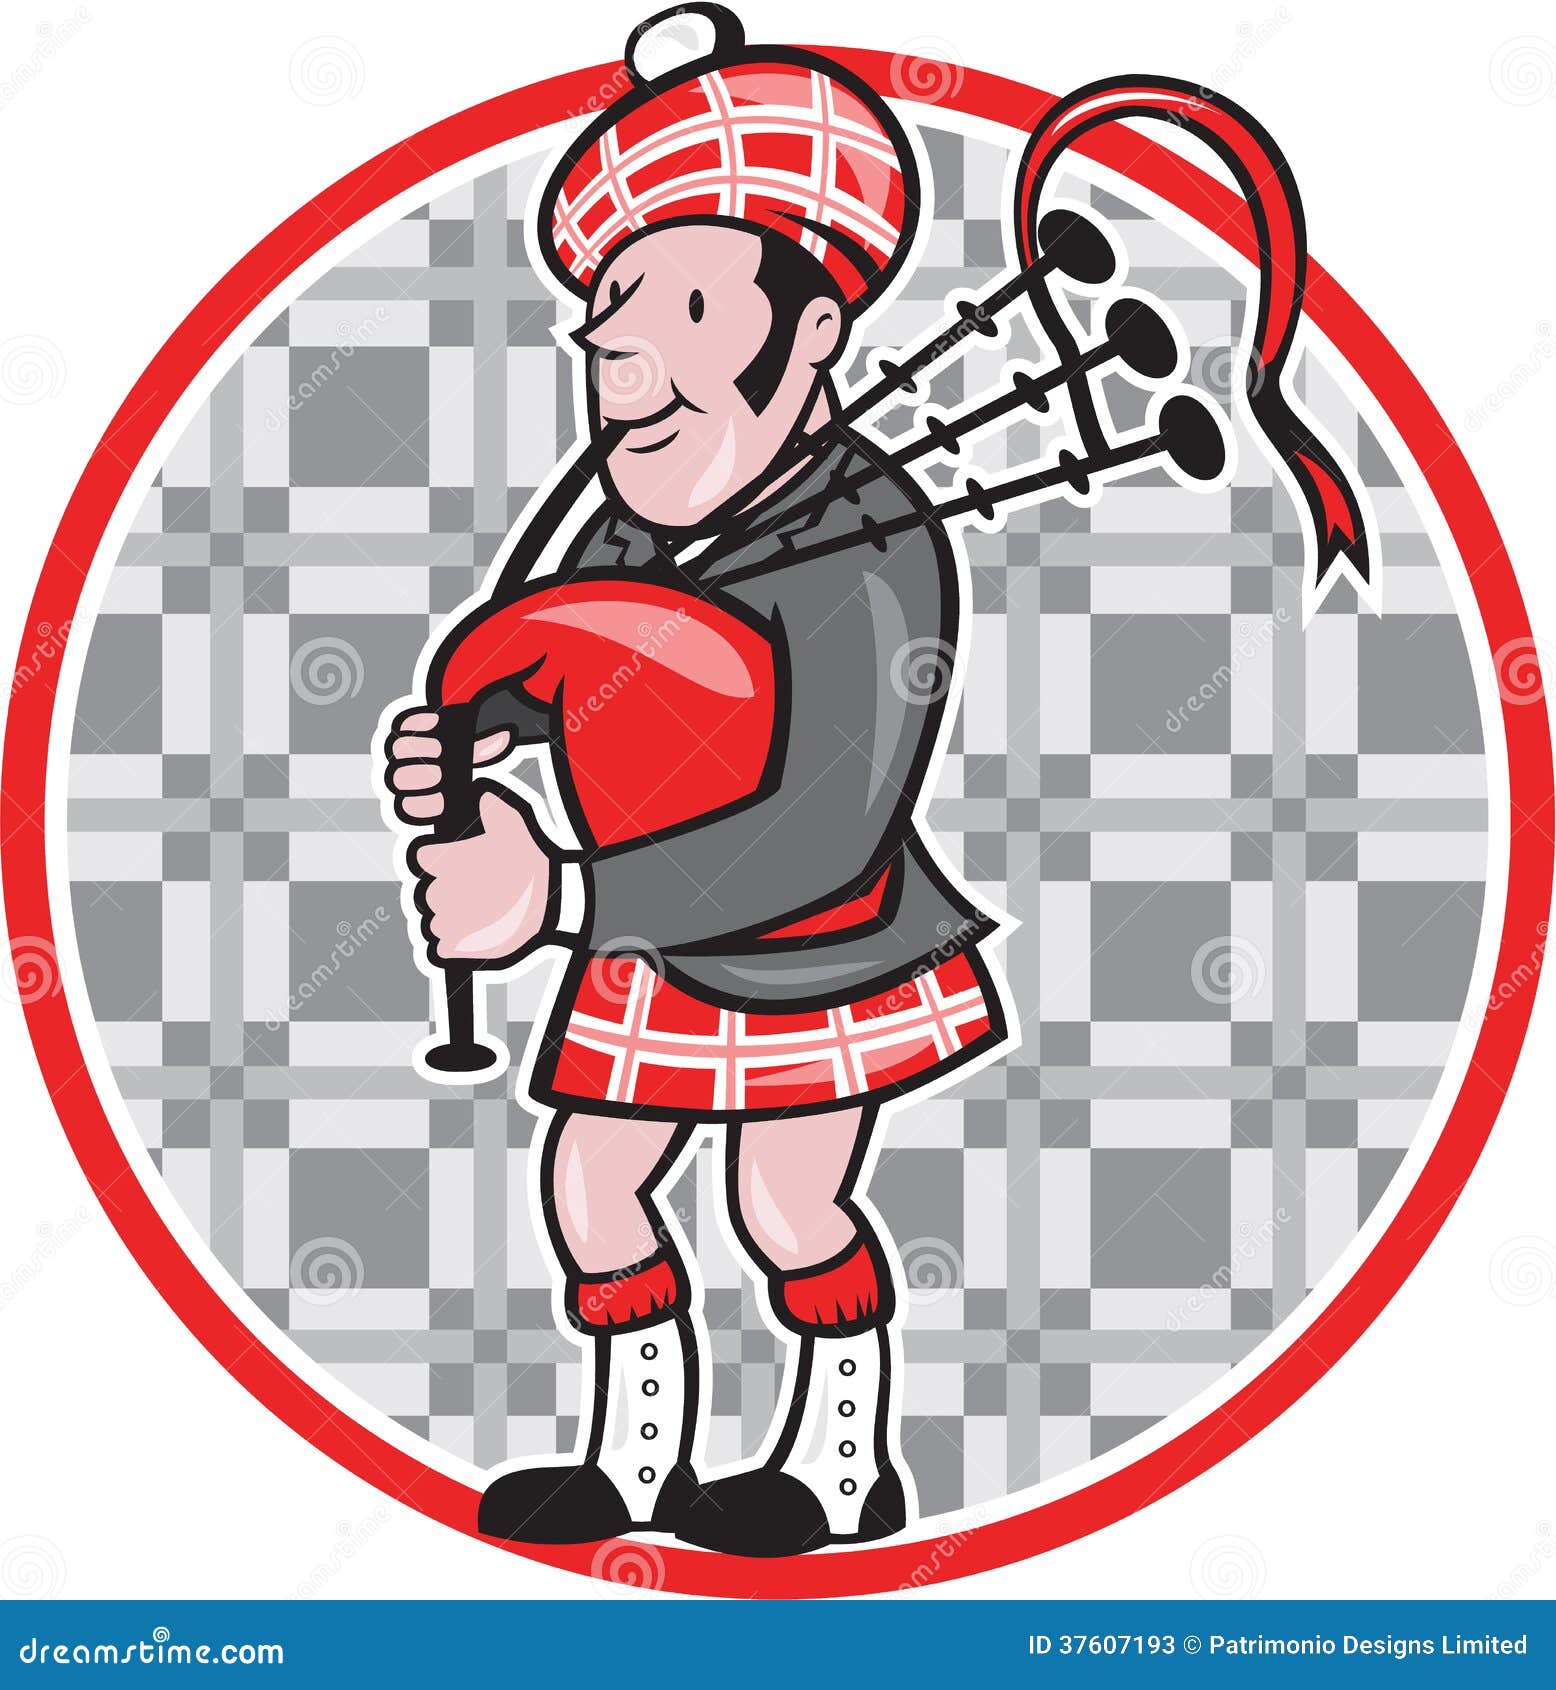 bagpipe clipart - photo #40